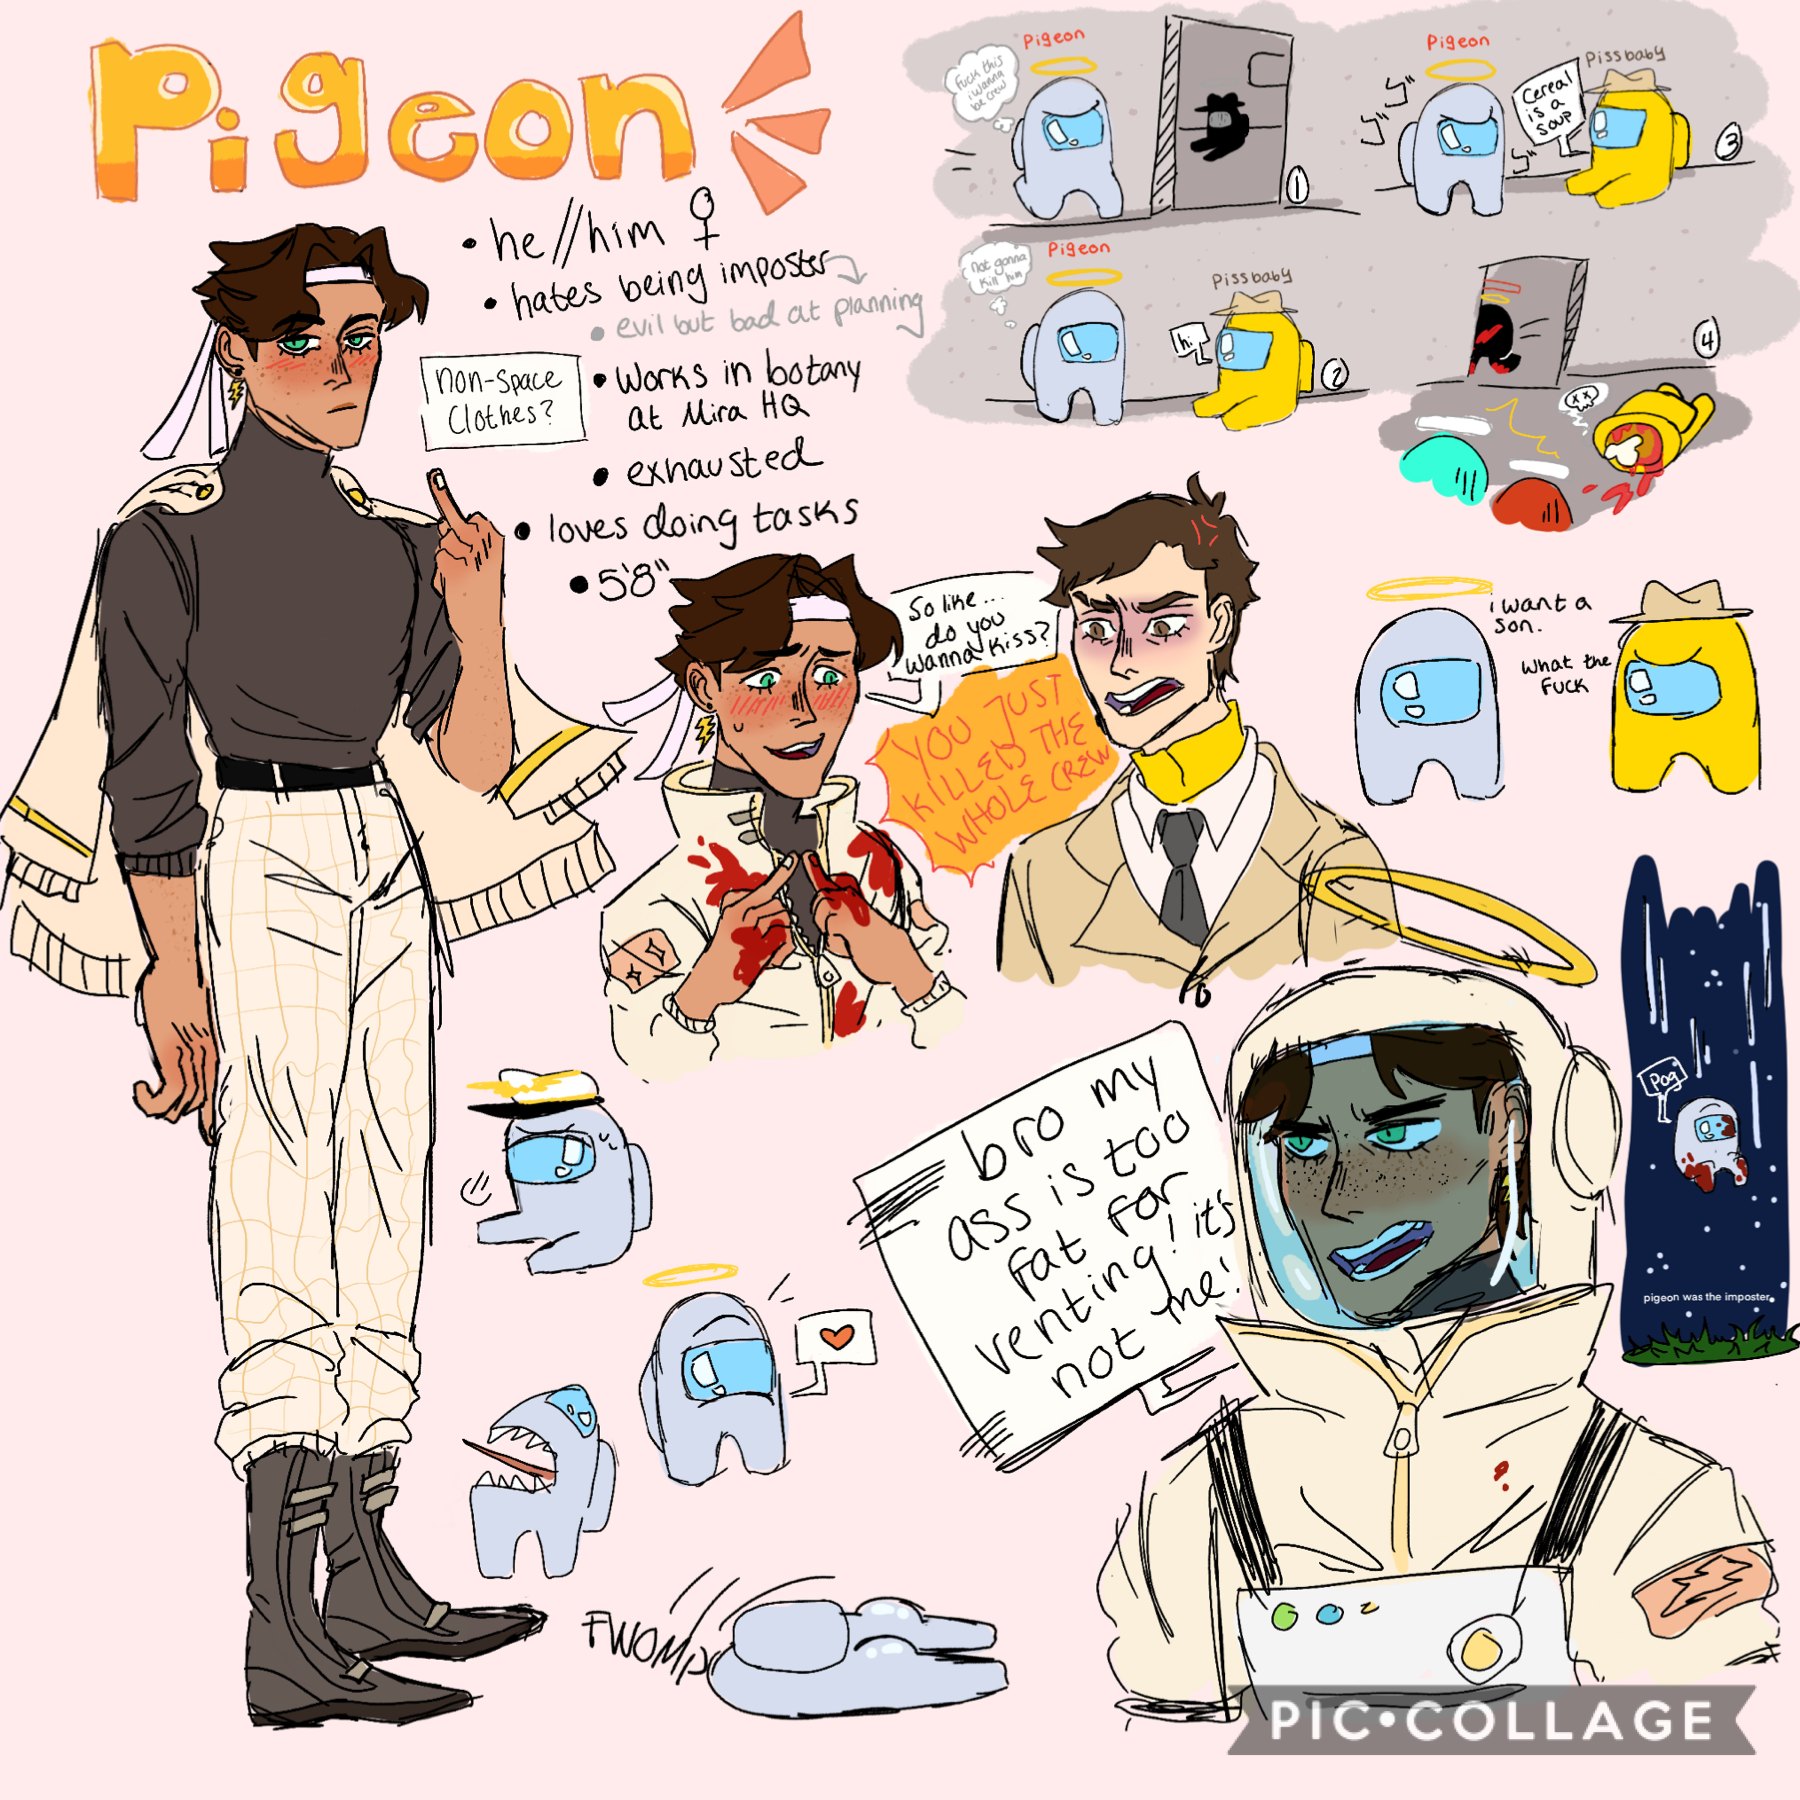 pigeon again ,.,.., but featuring !!! pī sśbaby !!!! my bfs character <3 this lad rlly got me clownin